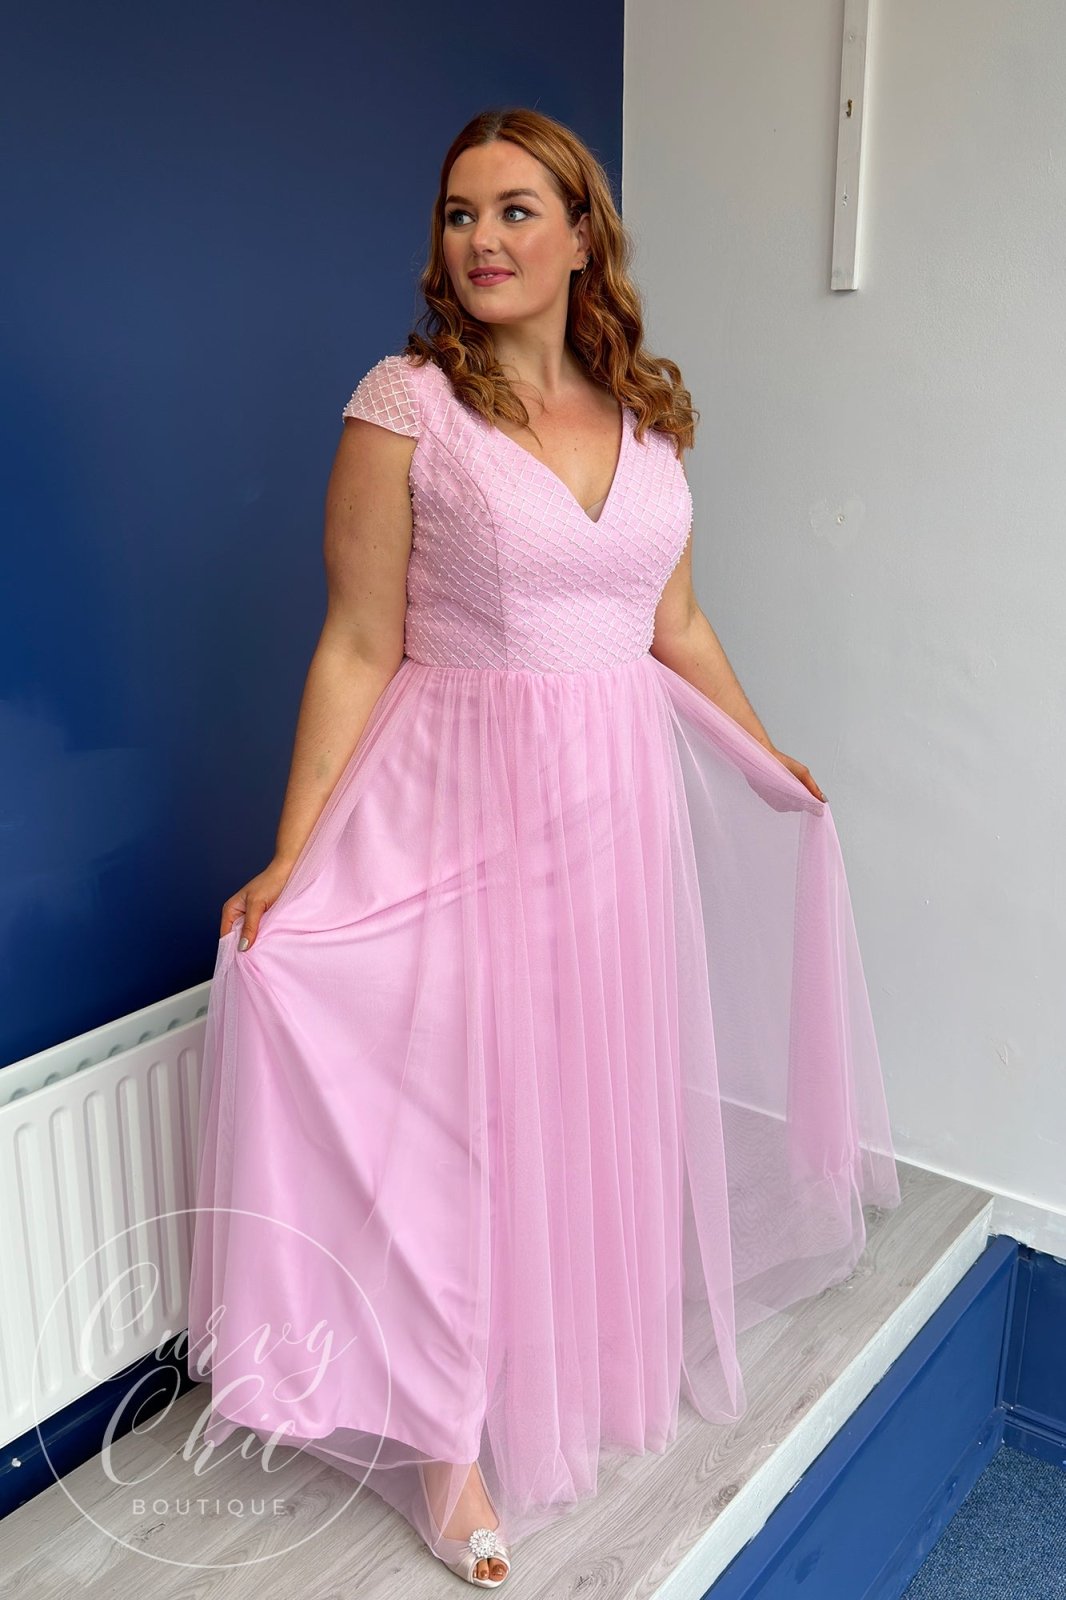 Violet | Candy Pink Formal Dress with Embroidered Embellished Bodice - Curvy Chic Boutique